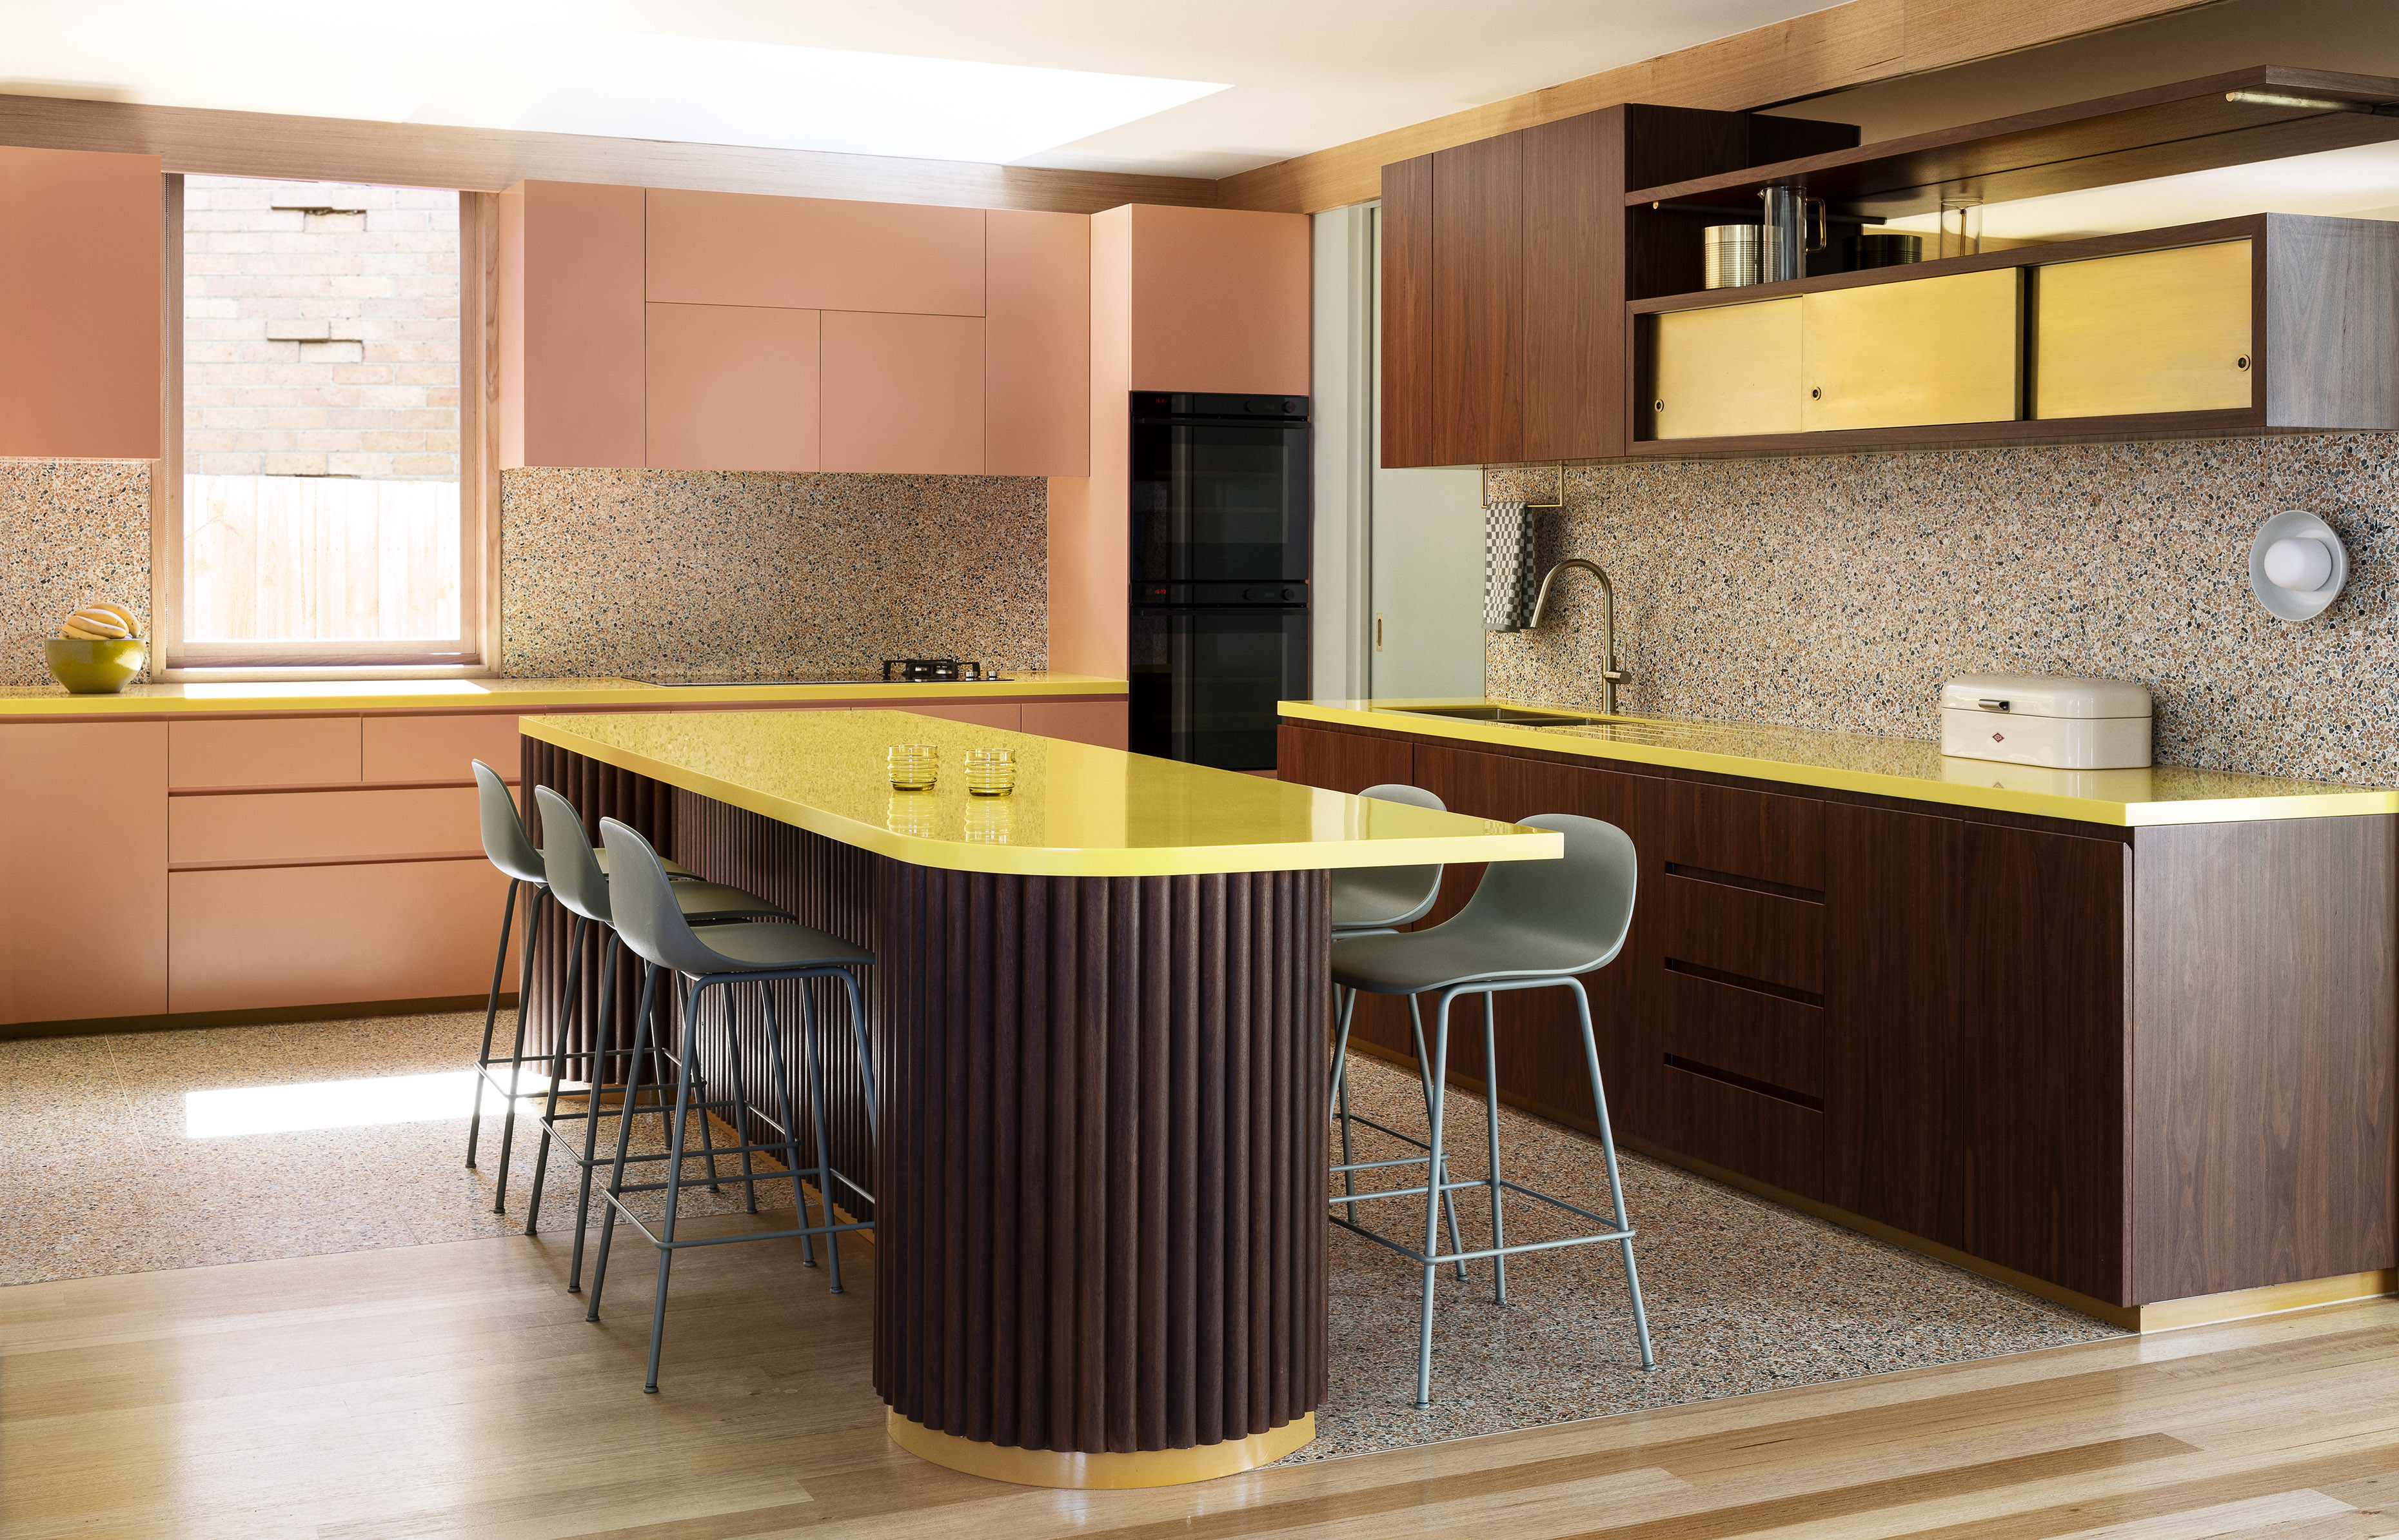 Colourful kitchen with yellow benches, pink cabinets and terrazzo floors by Wowowa